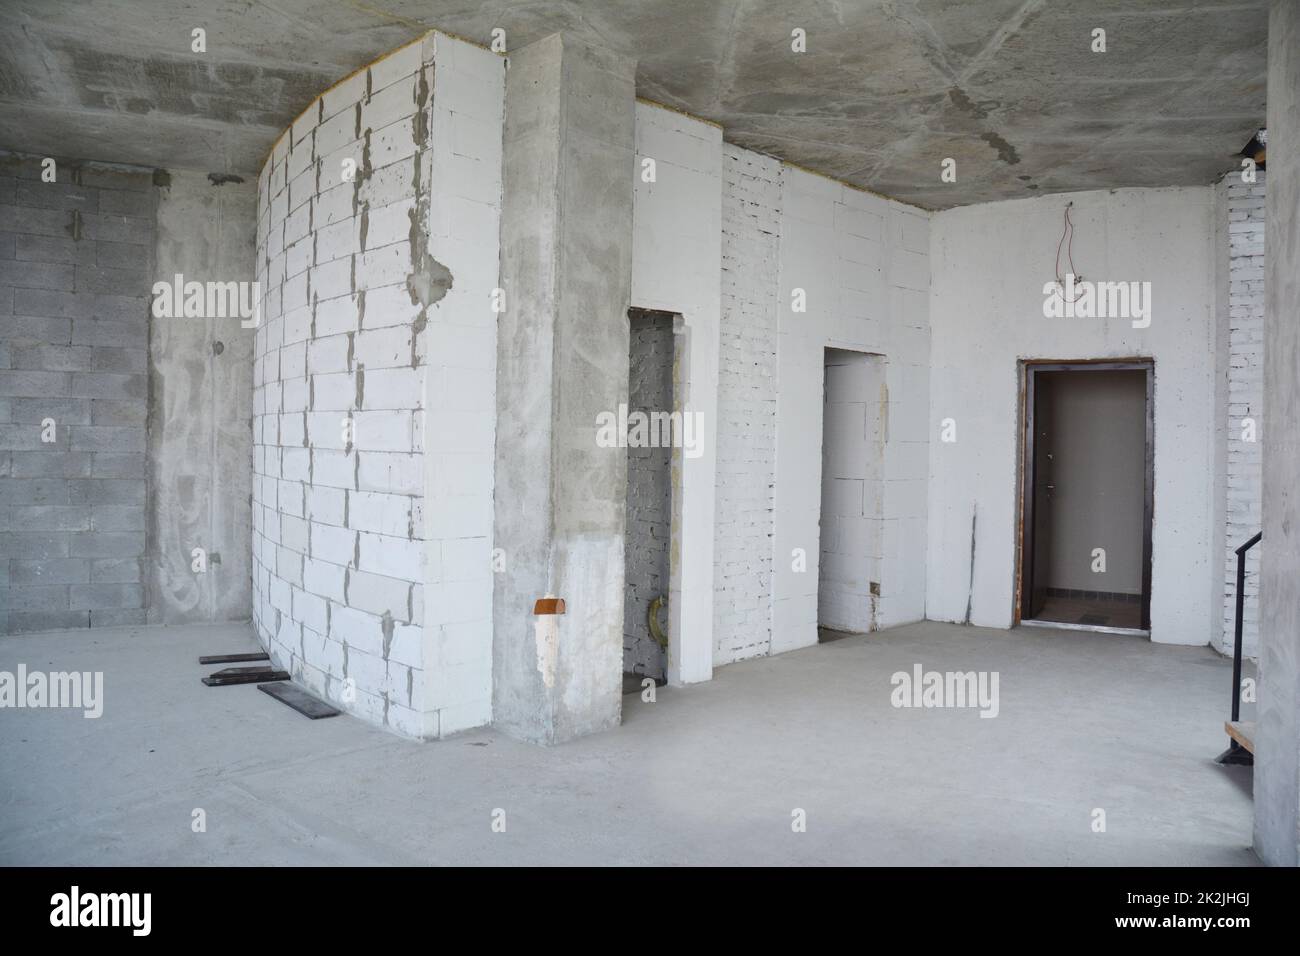 Interior hall room under construction, metal door lintels. Wall without plasterwork and ready to remodel Stock Photo